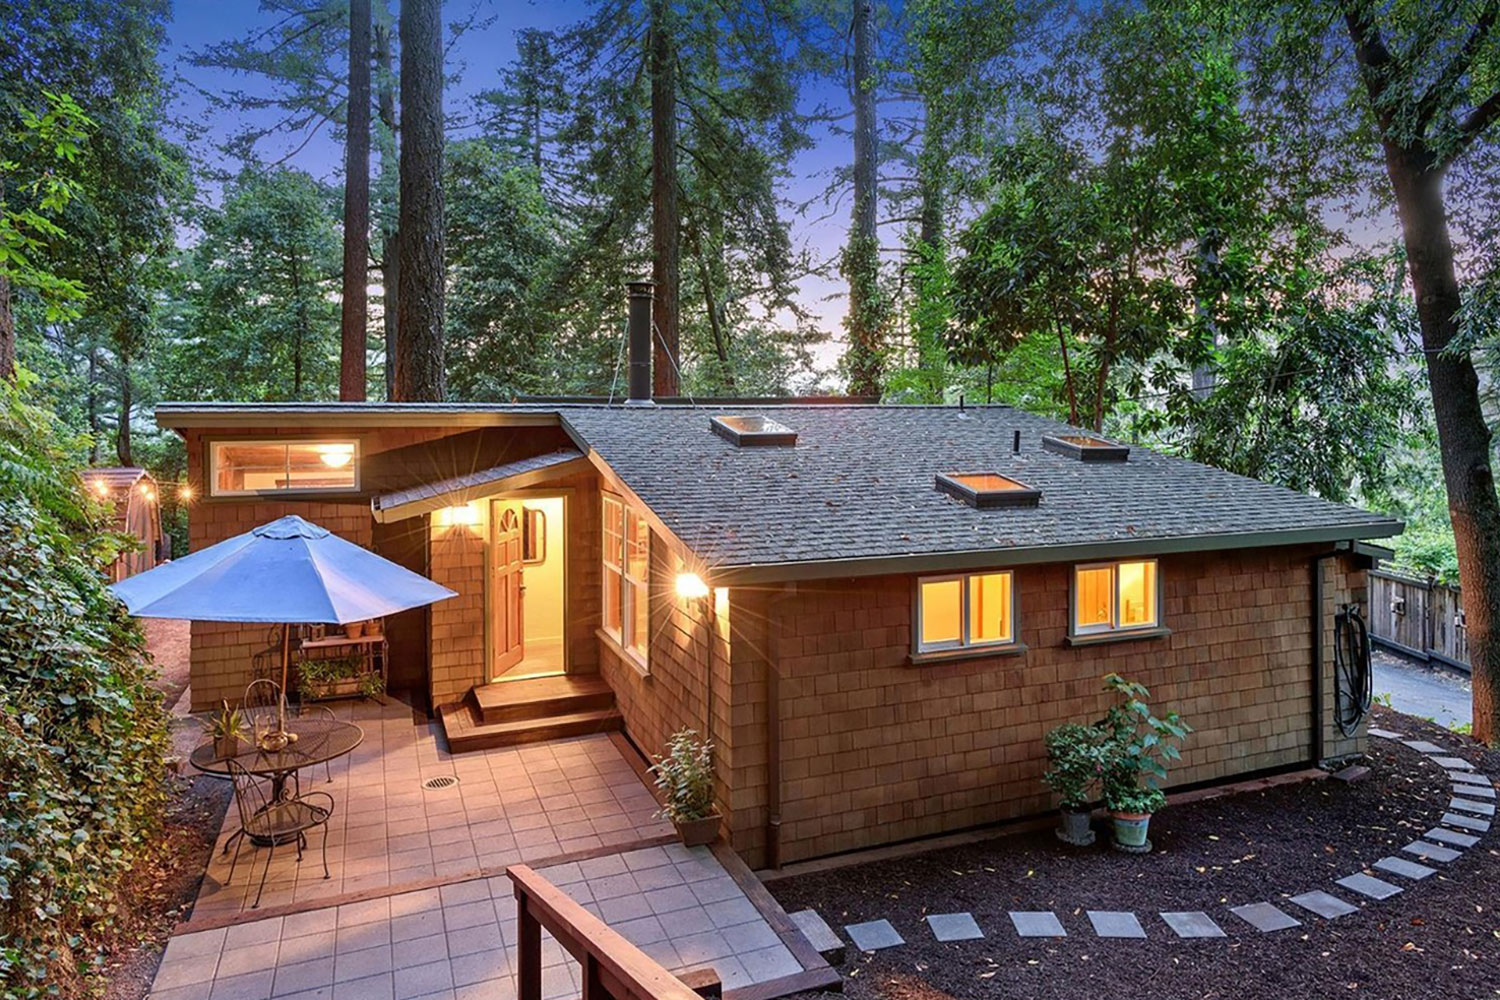 Russian River vacation home set amongst Redwood trees. Cabin style house with cedar trim. Landscaped garden and patio.